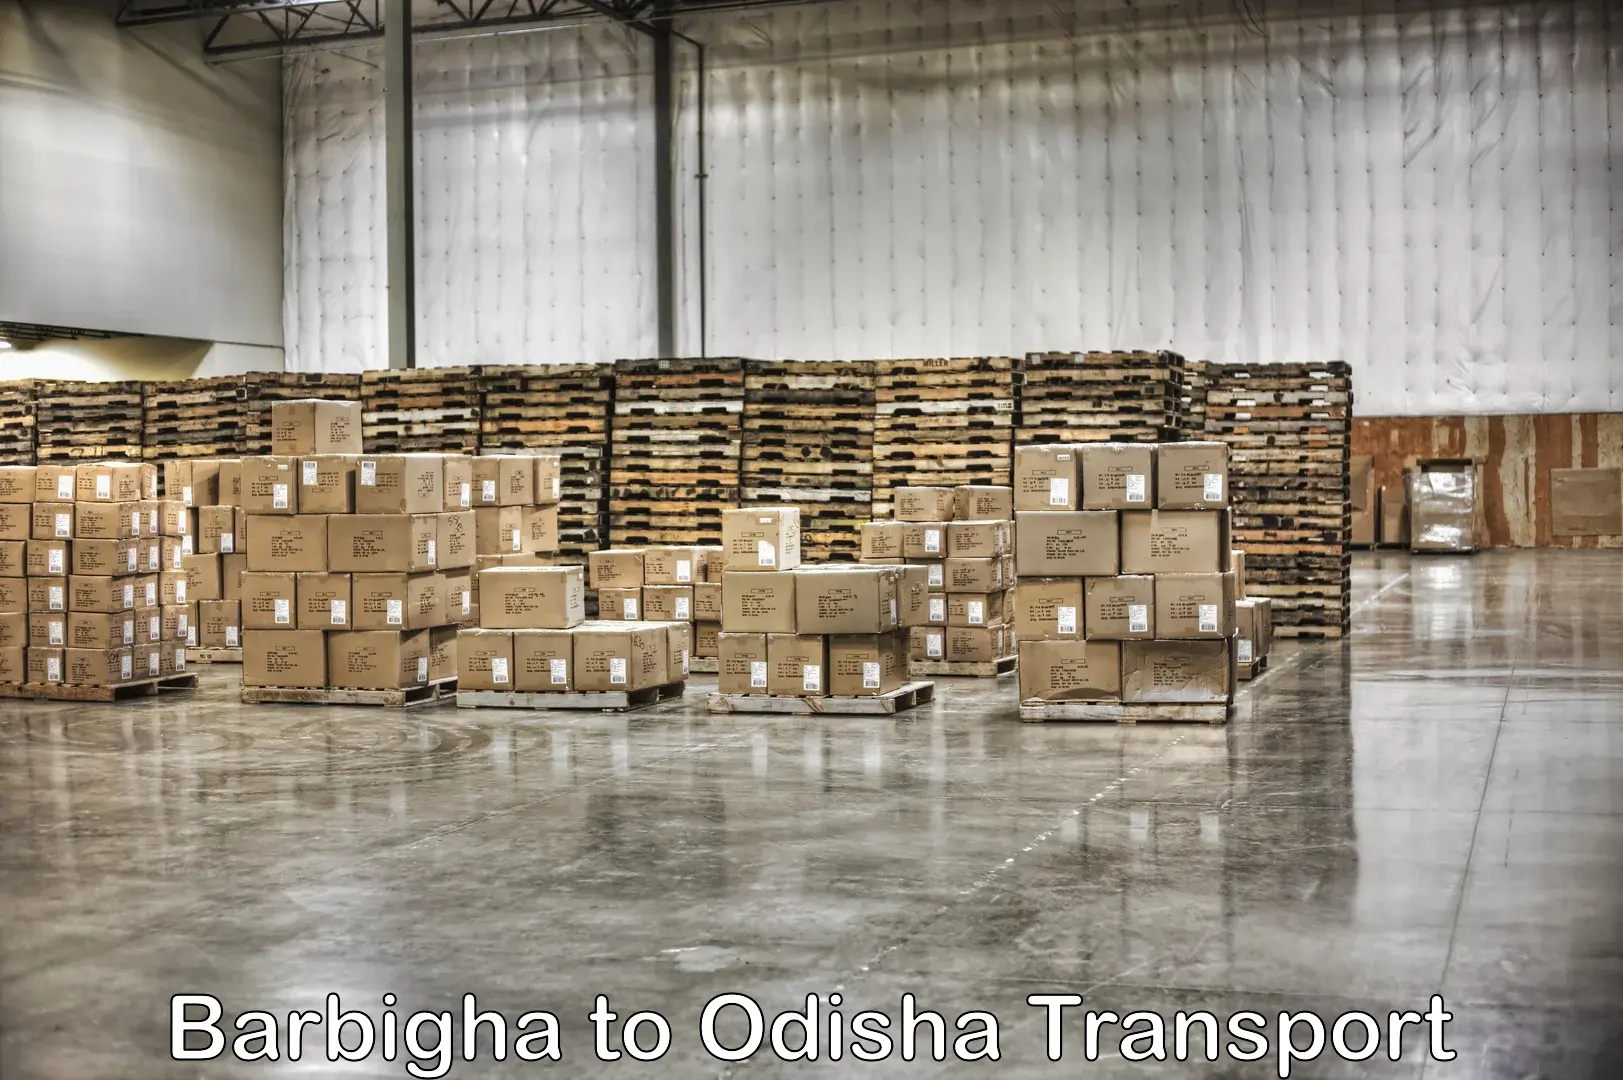 Part load transport service in India Barbigha to Sohela